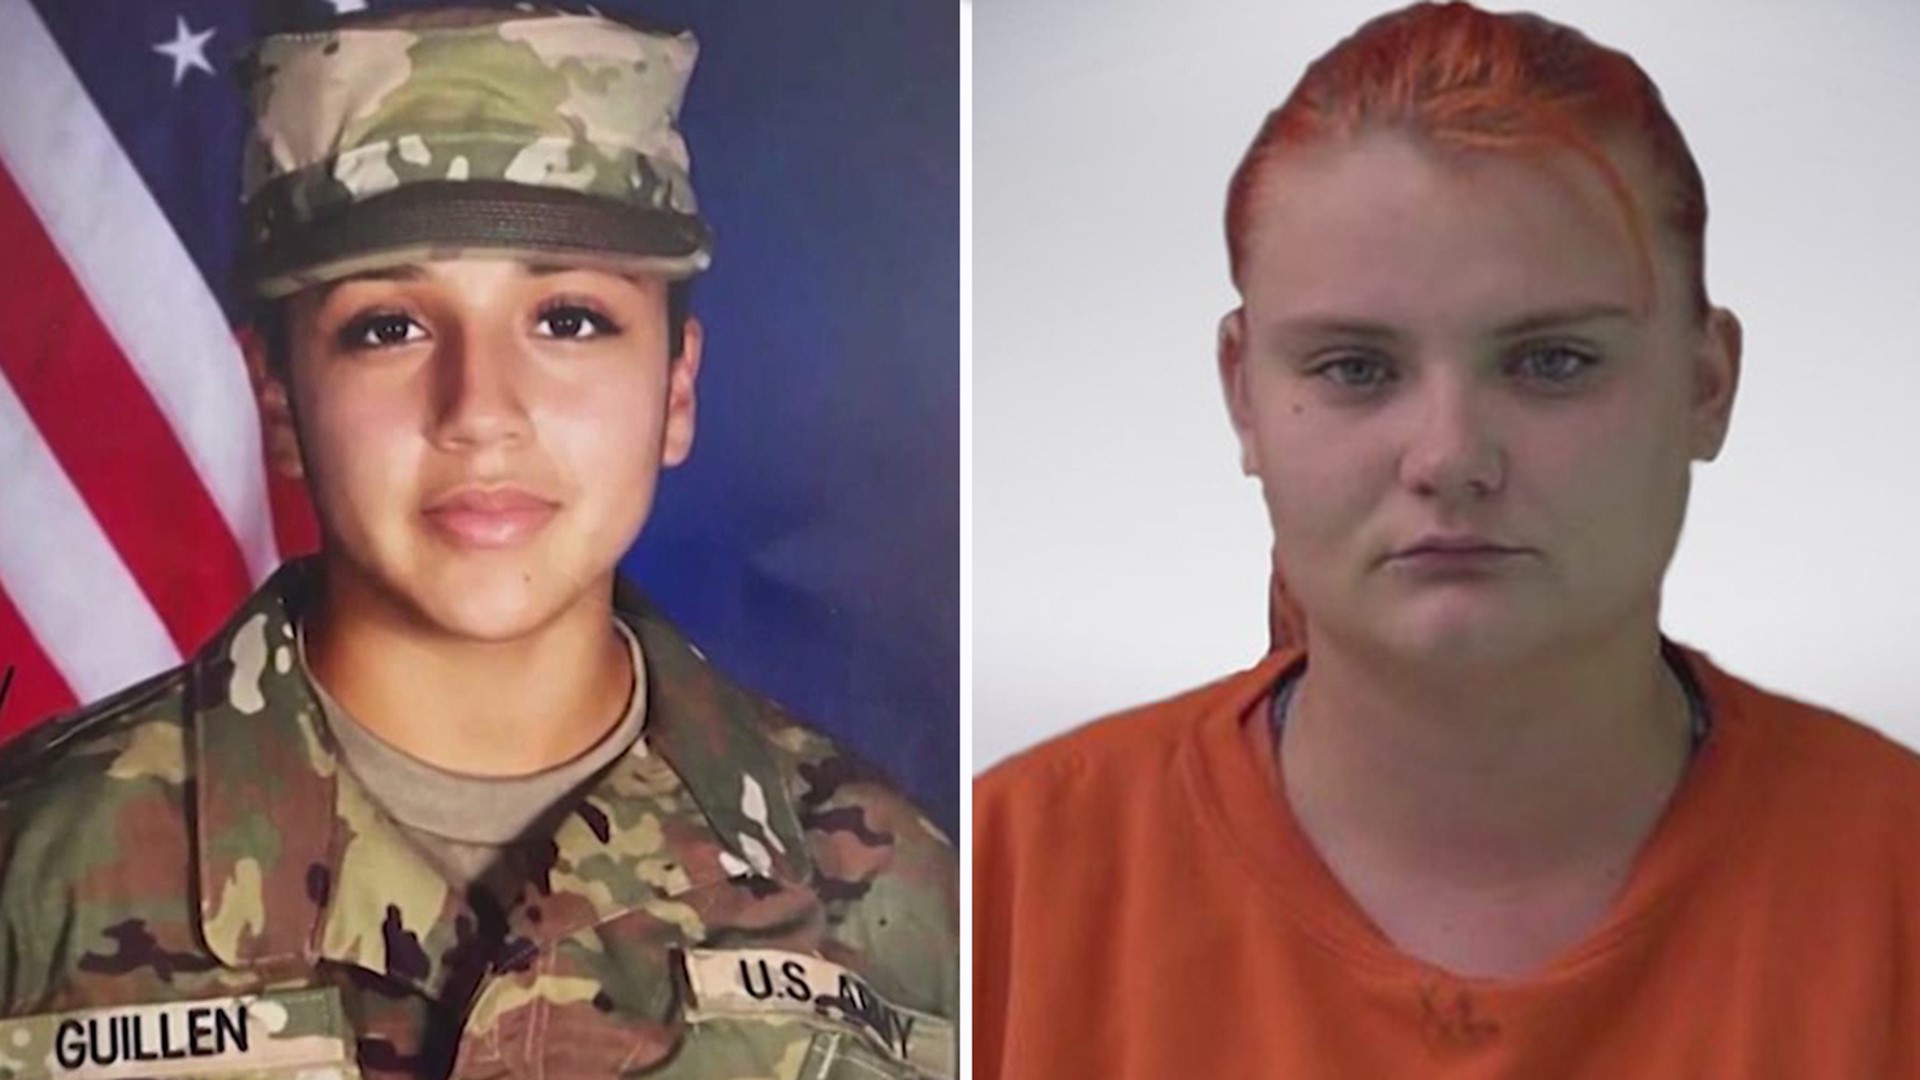 The woman charged in connection with the death of Fort Hood soldier Vanessa Guillen pleaded guilty in a federal courtroom Tuesday.